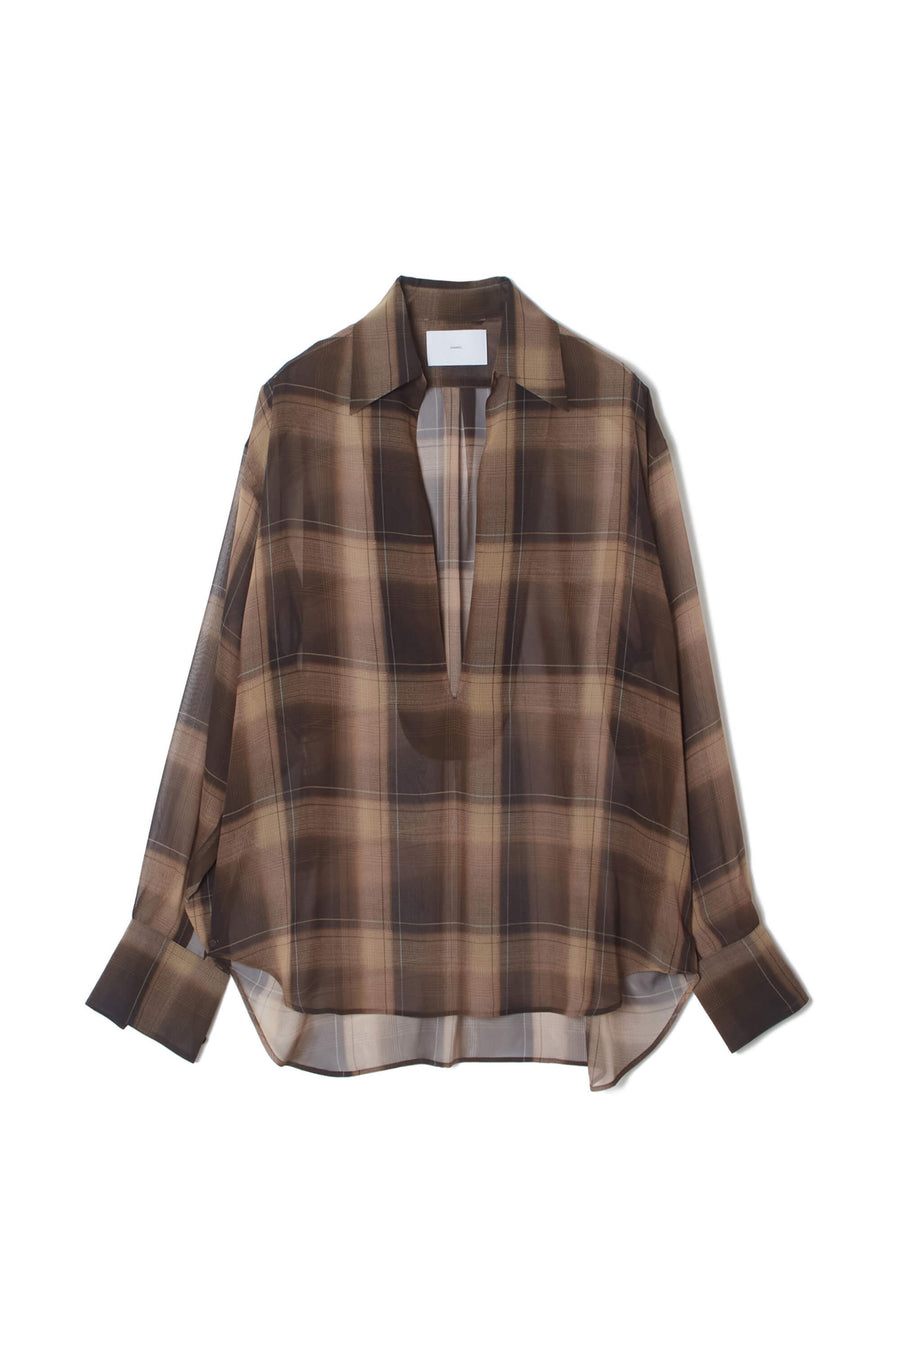 SUGARHILL  SHEER OMBRE BLOUSE(BROWN CAMEL)